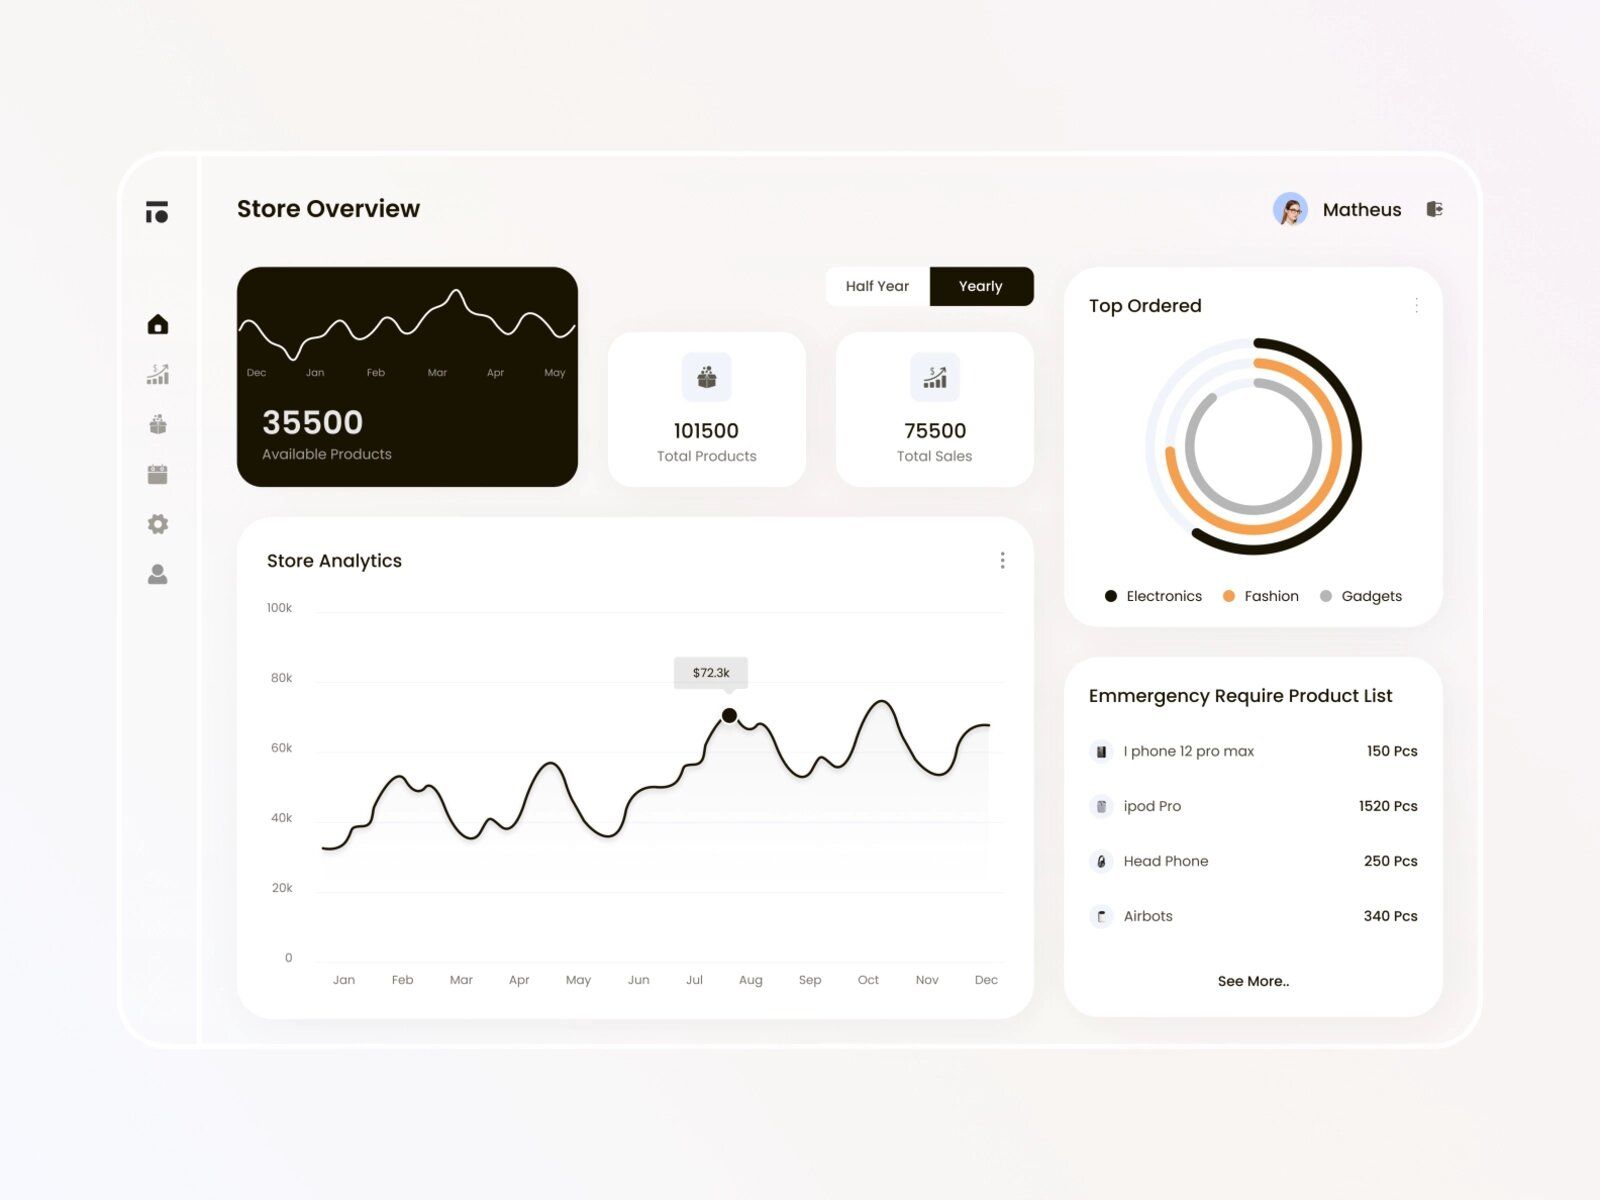 An accounting software is also beneficial since you can track your inventories with help of it (*image by [Murad Hossain 🔥](https://dribbble.com/muradhossain){ rel="nofollow" target="_blank" .default-md}*)